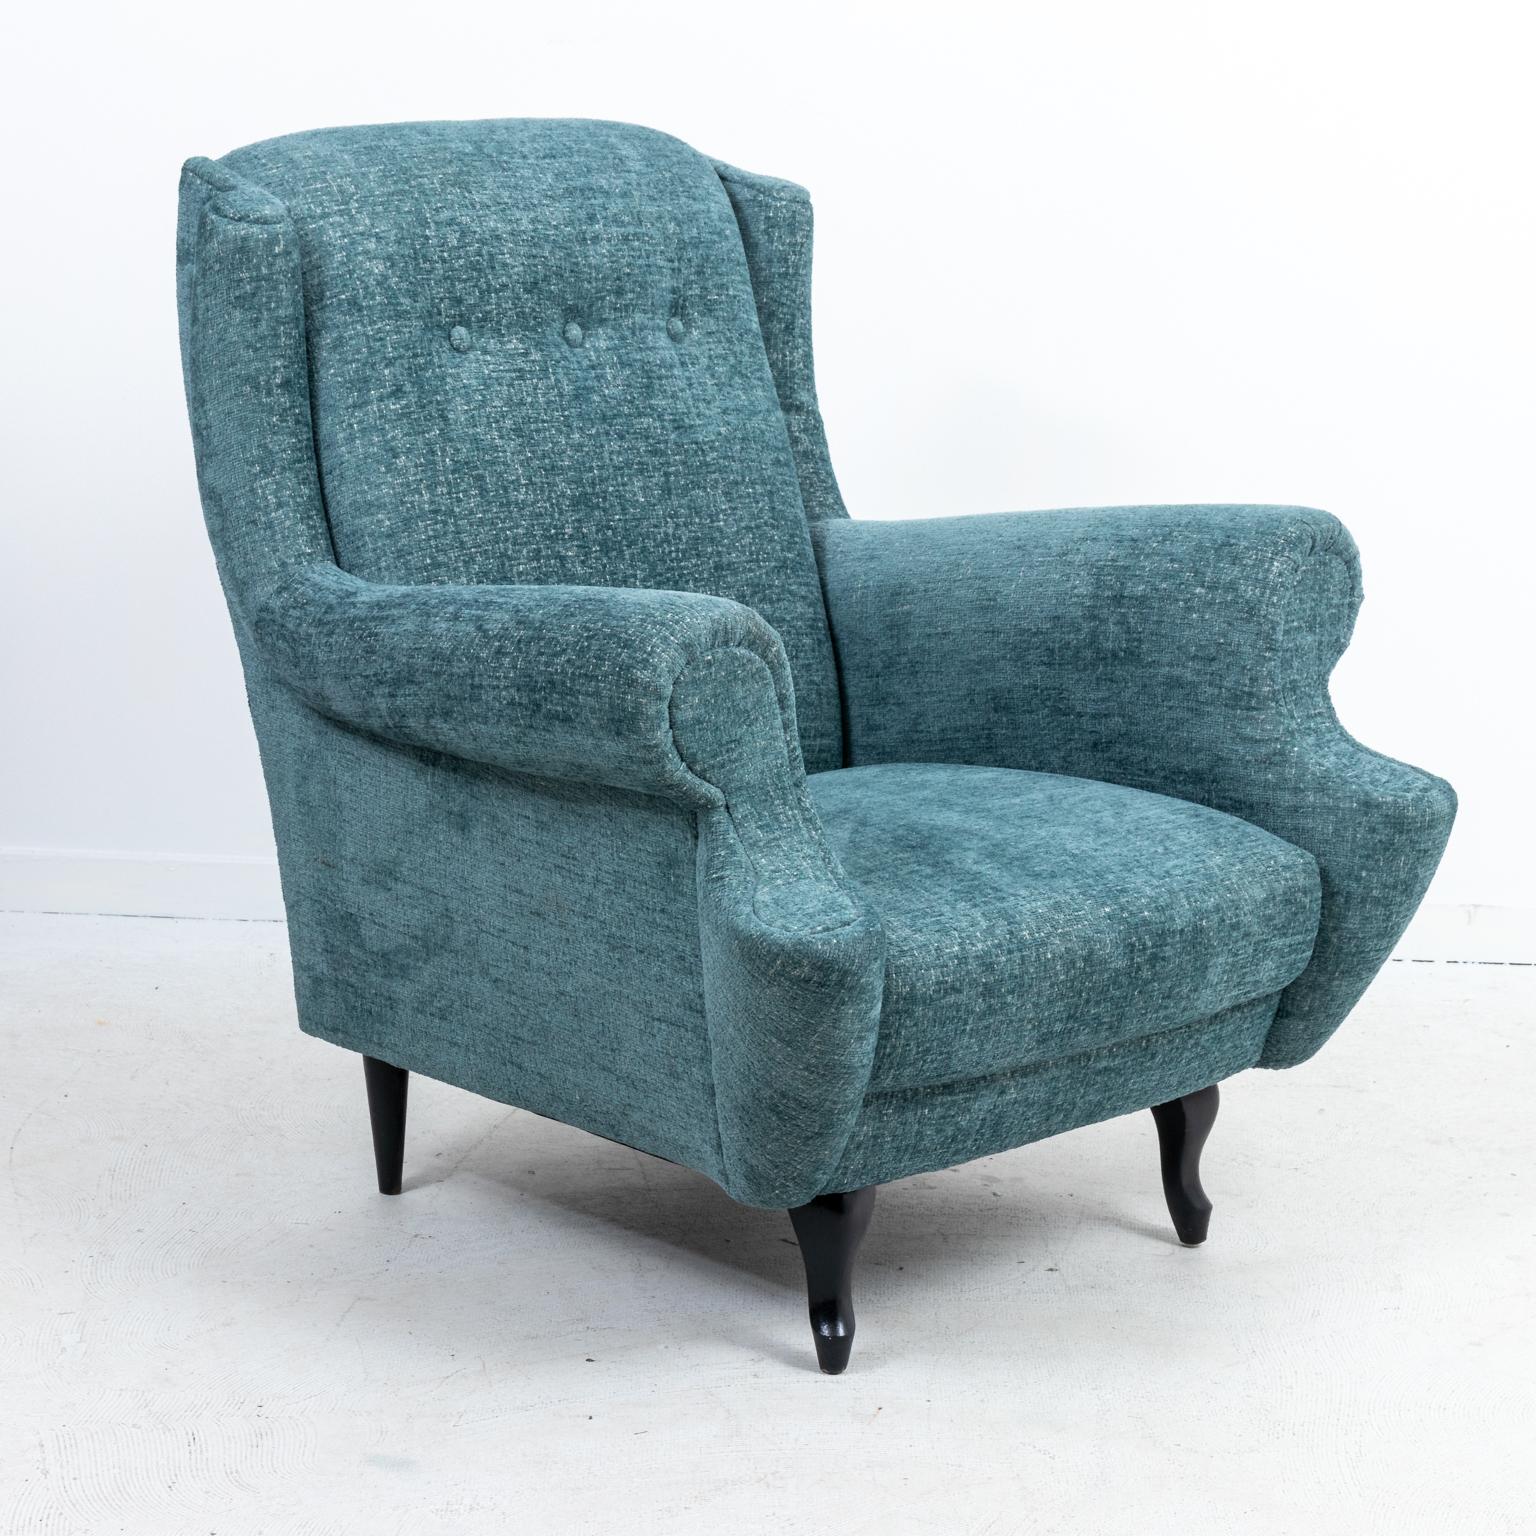 Mid-20th Century Mid-Century Modern Roll Arm Lounge Chair For Sale